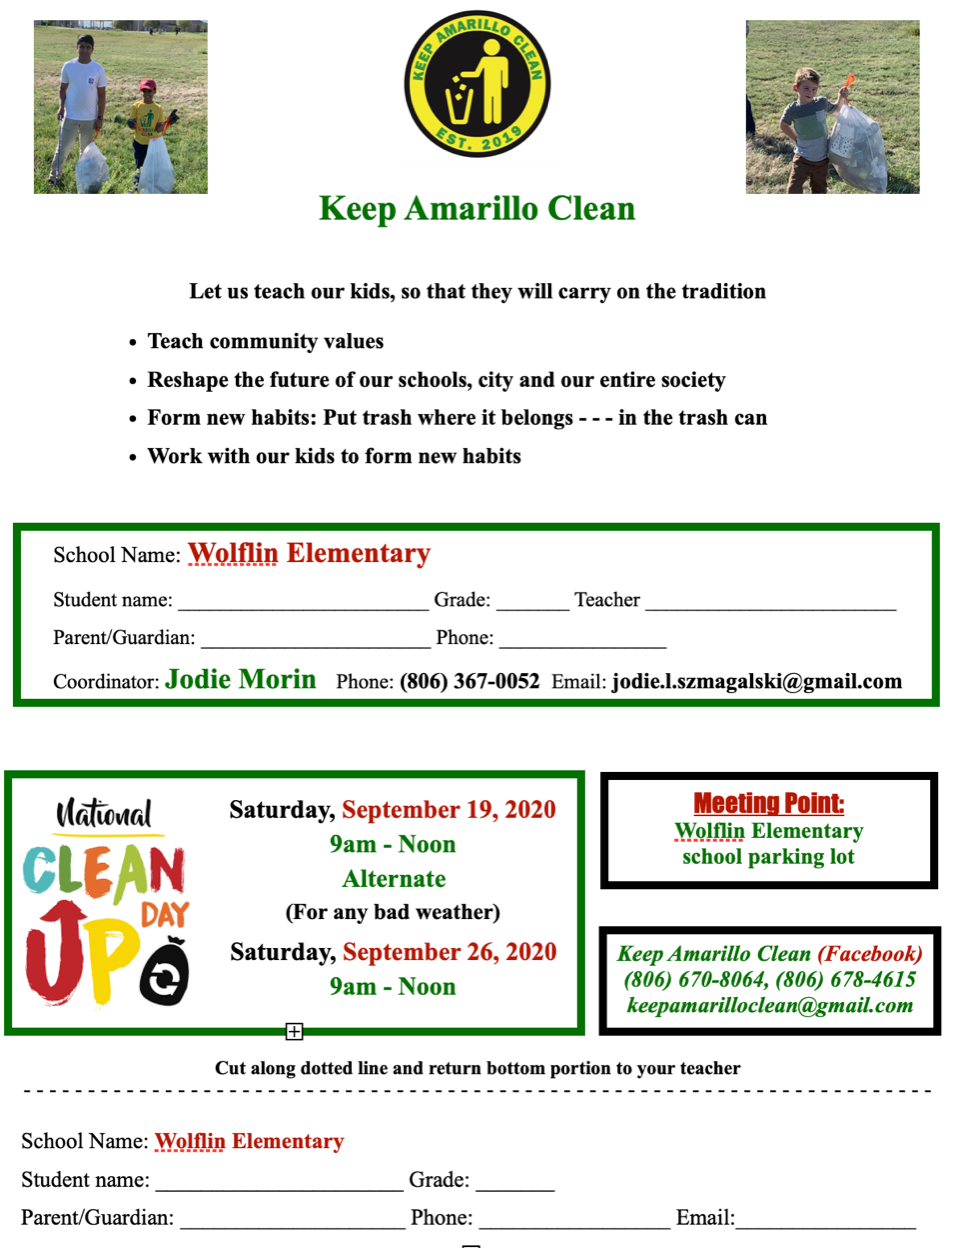 National CleanUp Day Amarillo 4.jpg